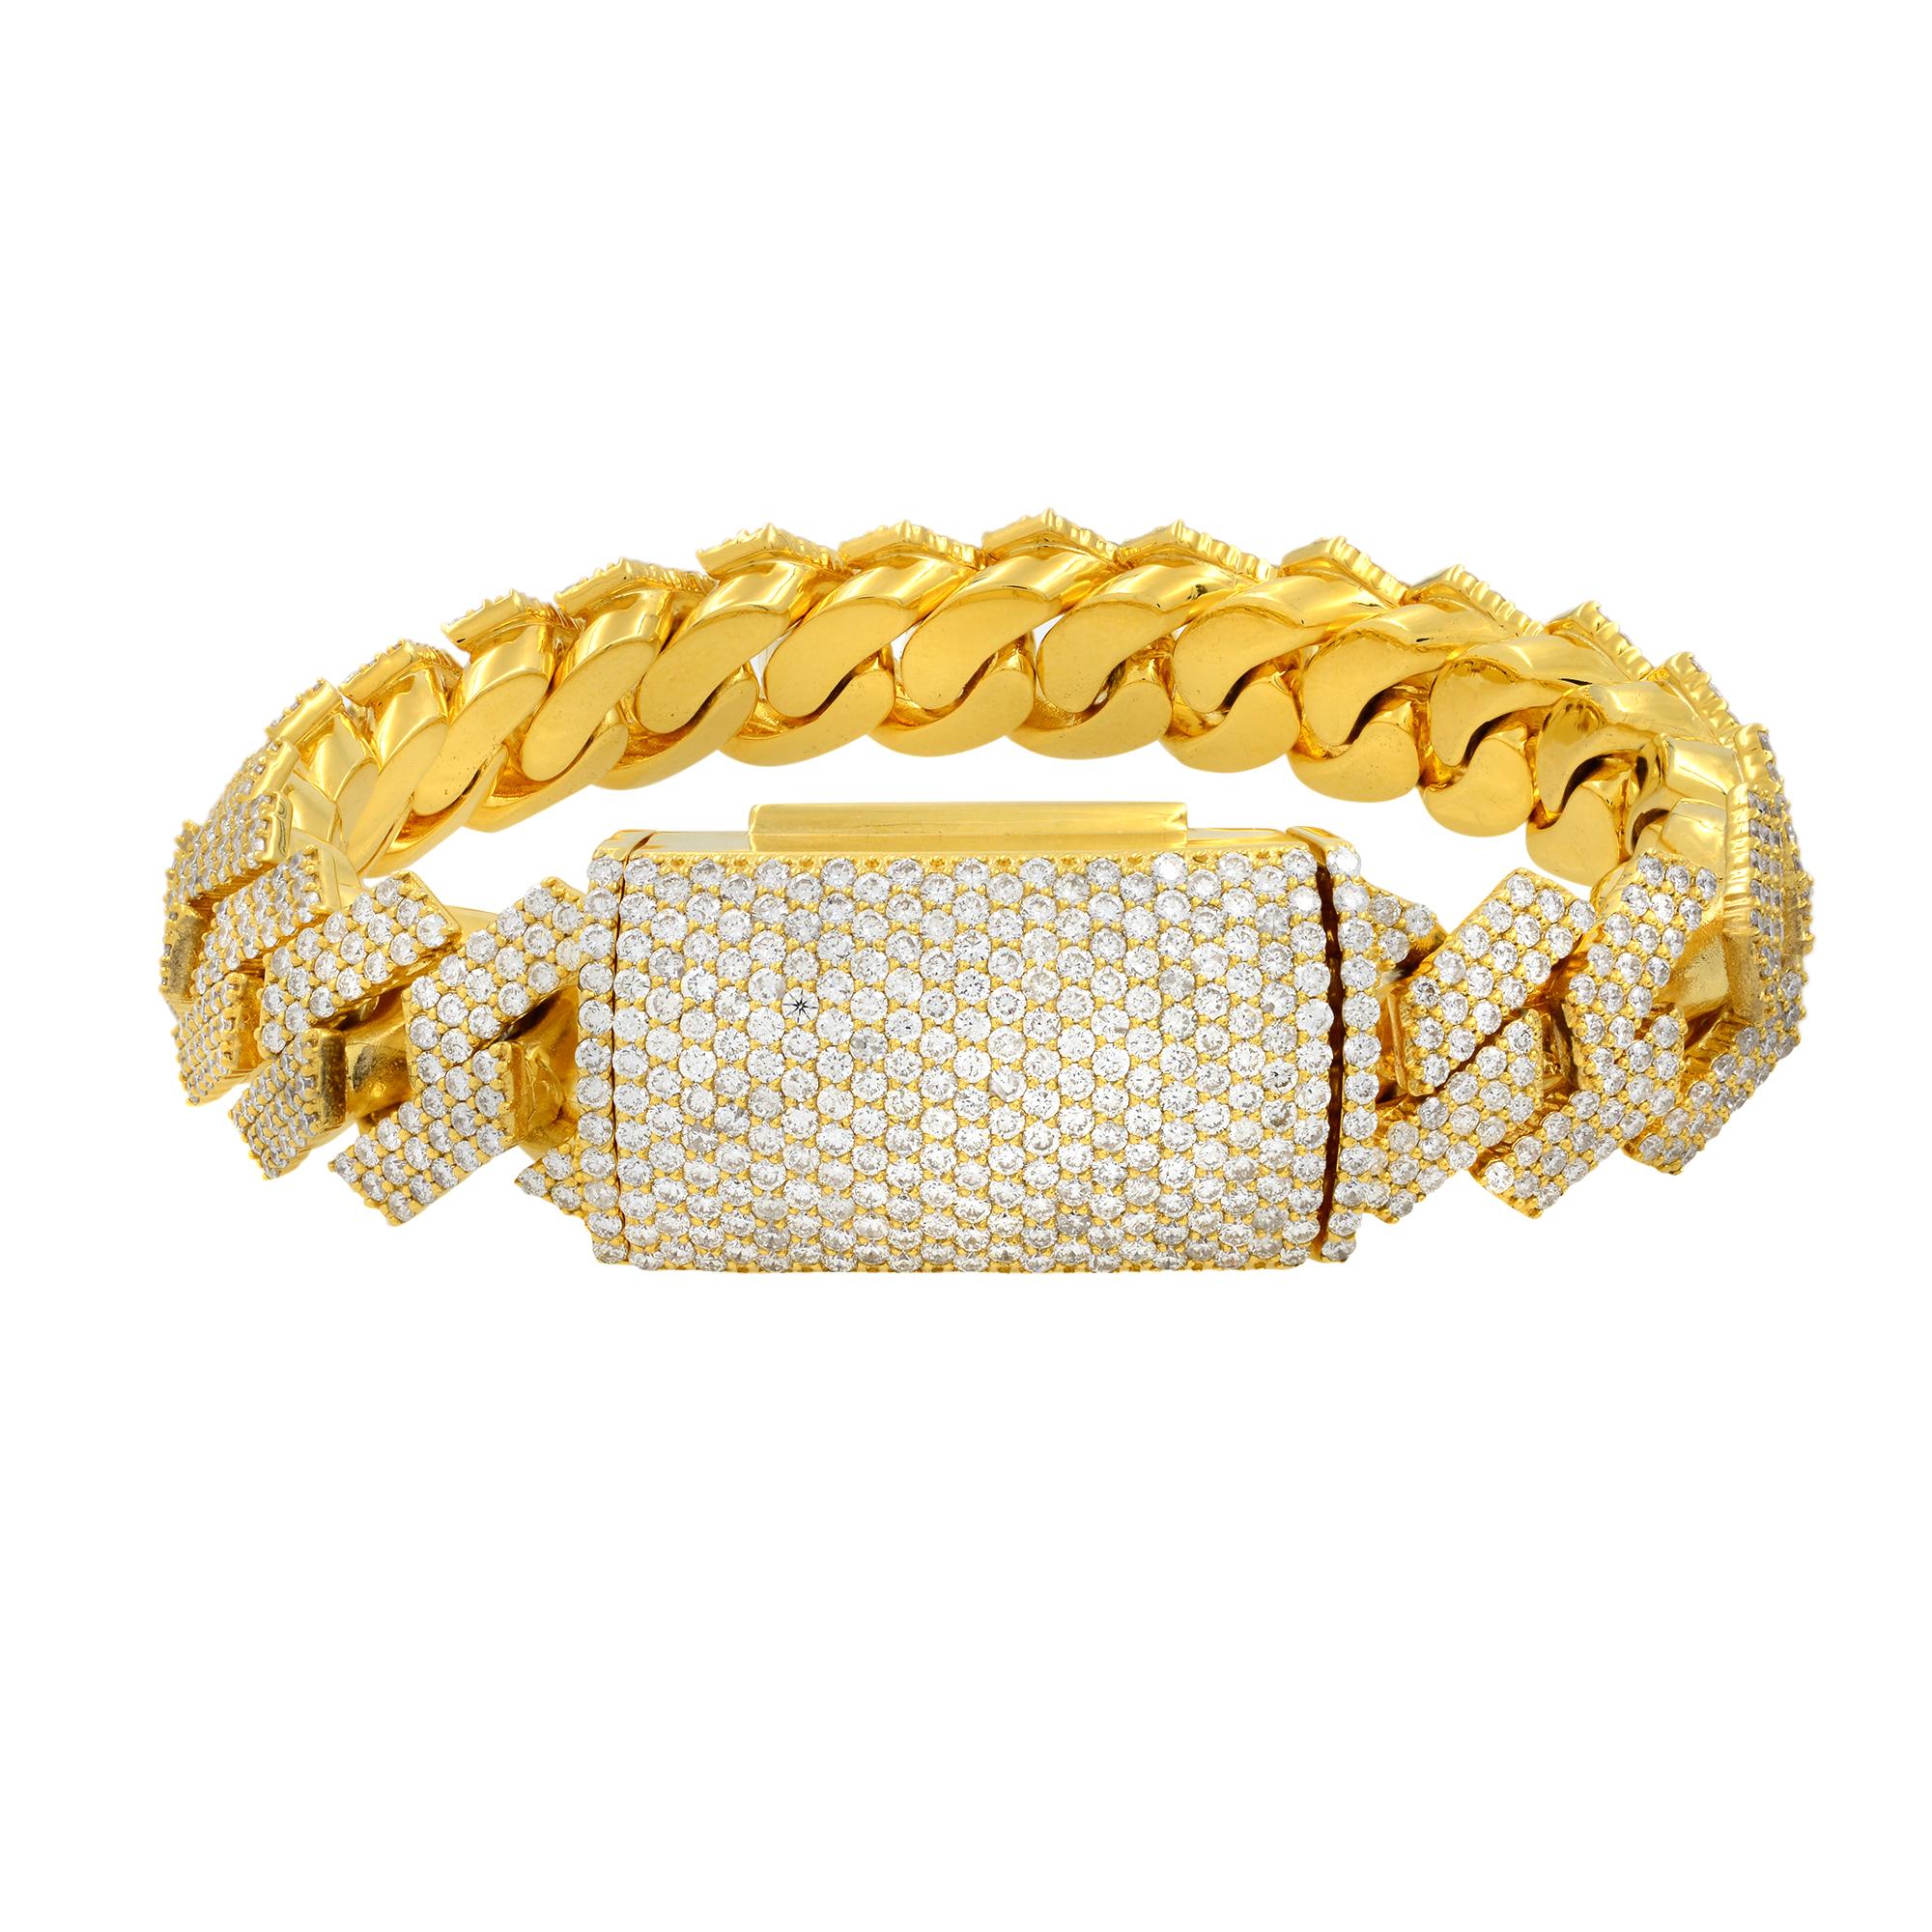 This Cuban link unisex bracelet is designed in 14K Yellow Gold, carries elegant round diamonds, pave set in each of its links which brings out the diamonds more efficiently, showcasing complexity and distinction. Total carat weight, 16.50. Diamond